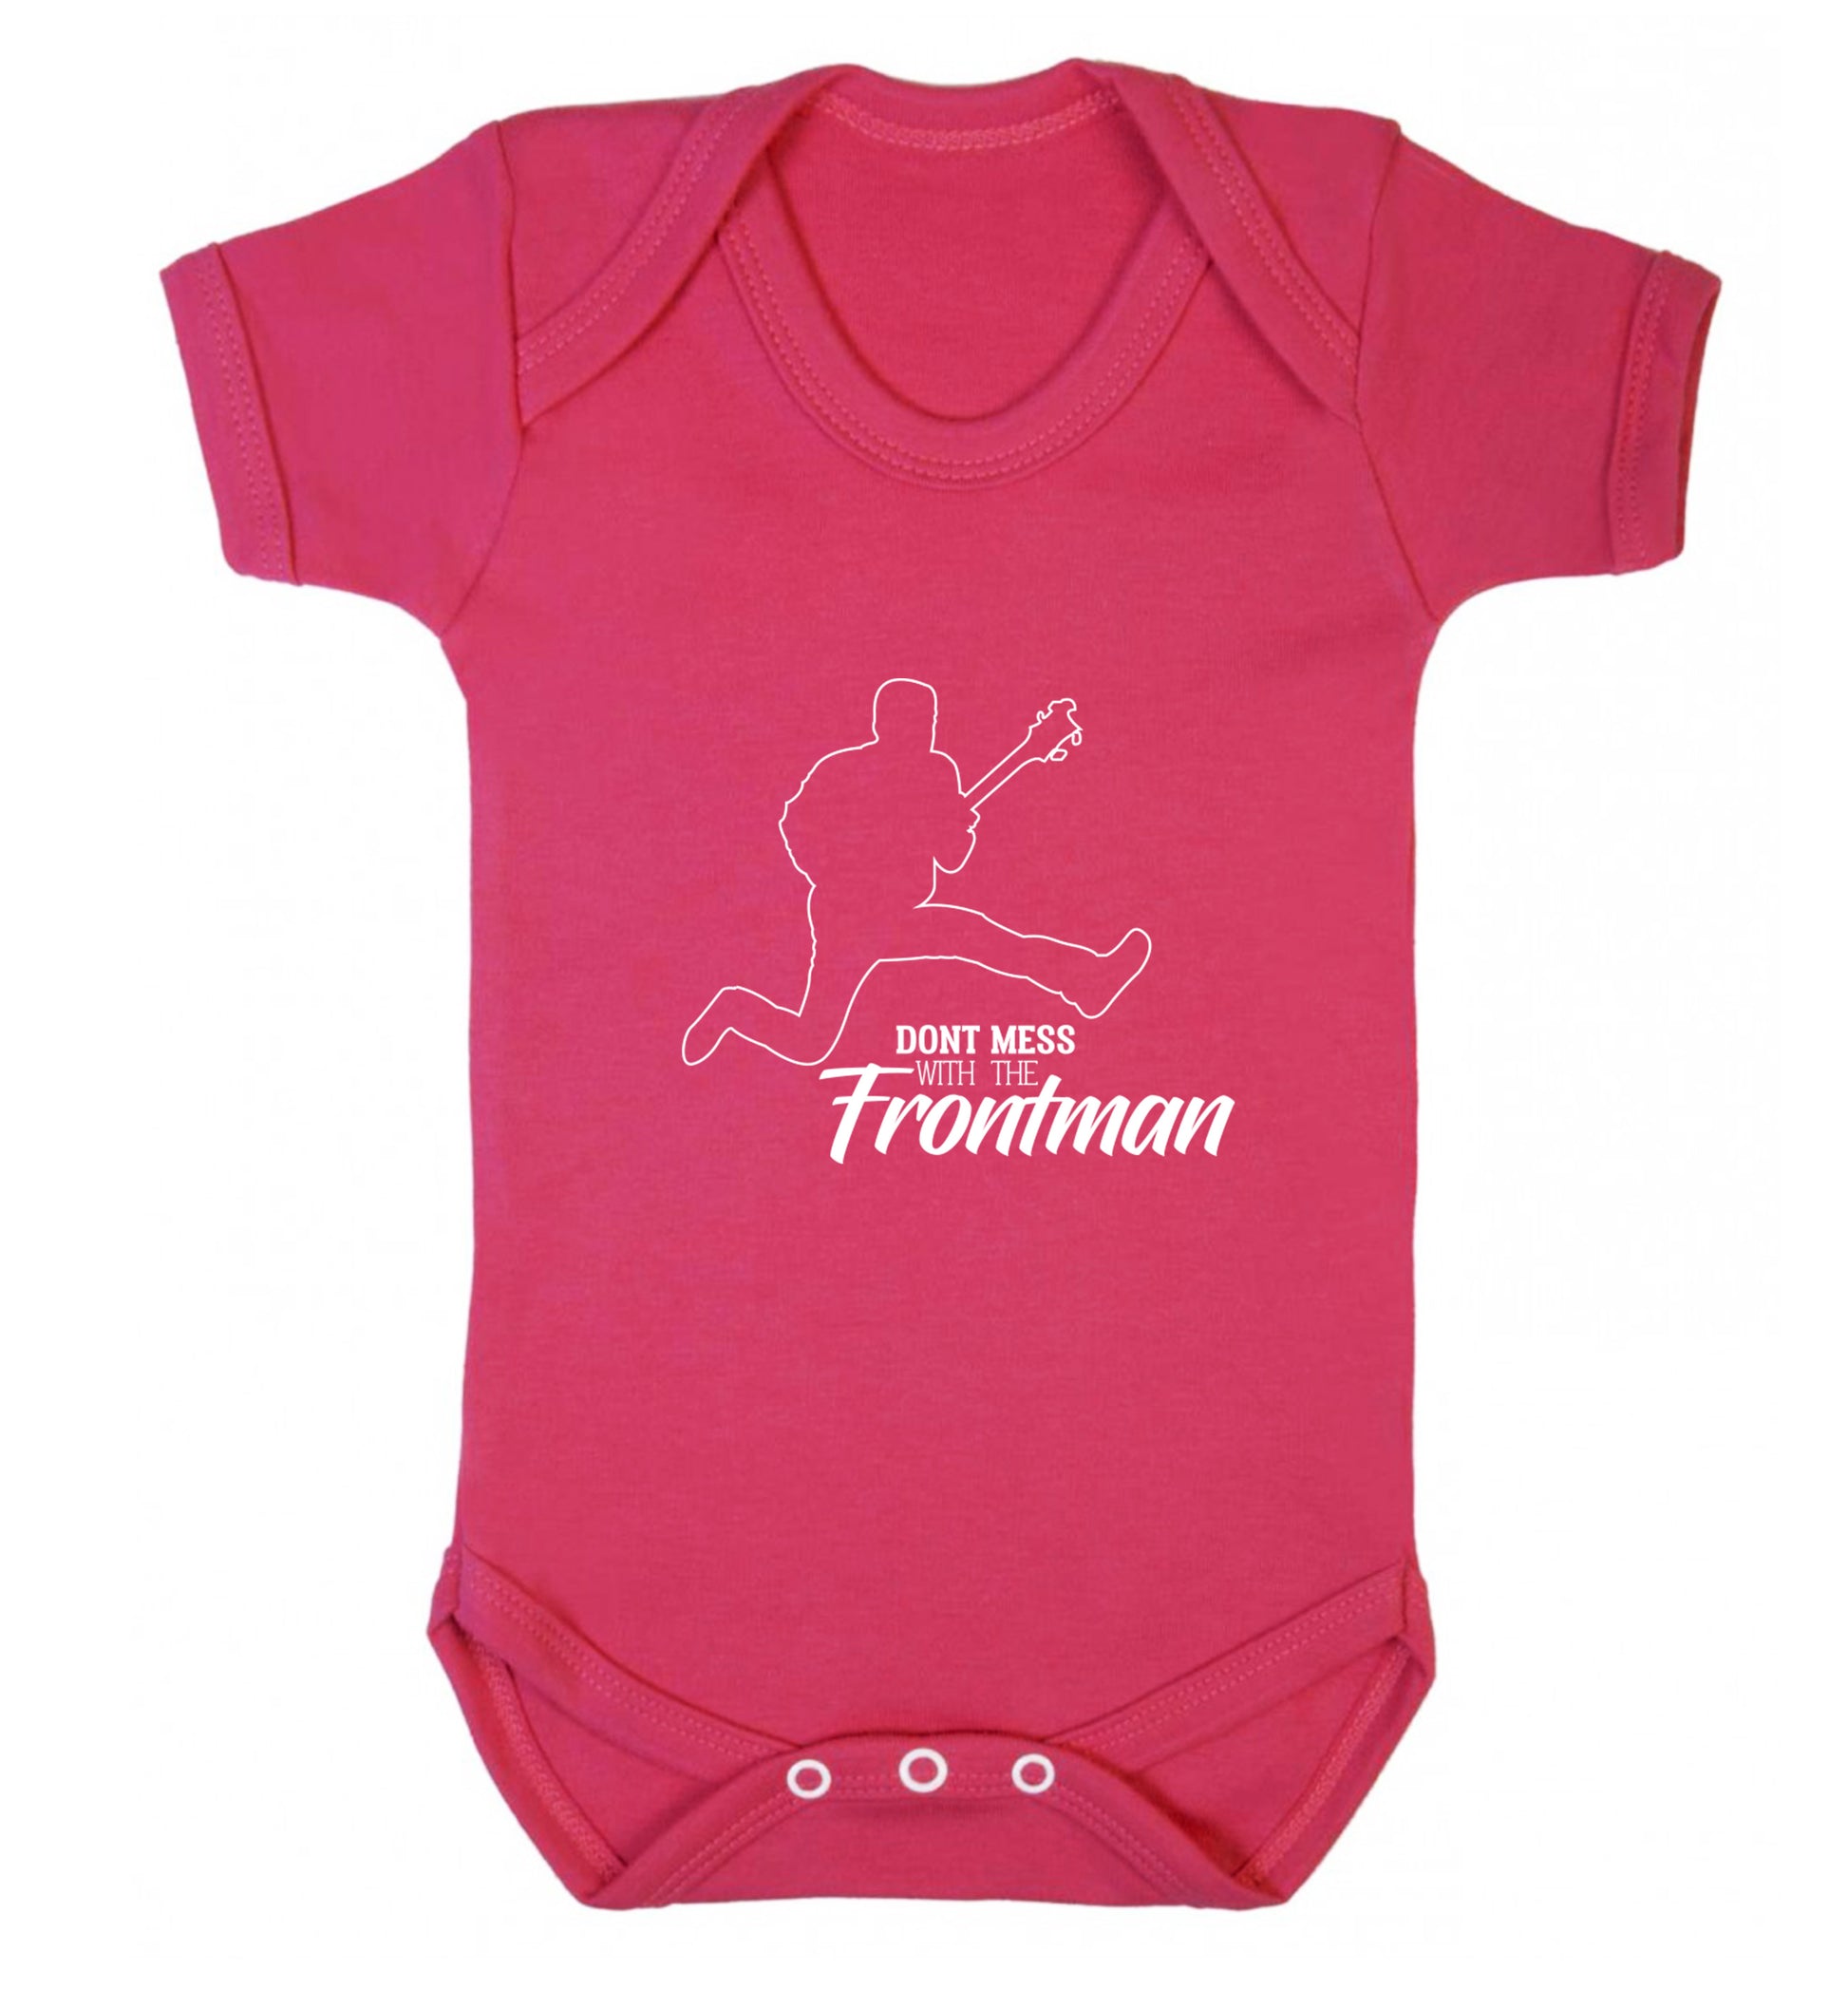 Don't mess with the frontman Baby Vest dark pink 18-24 months